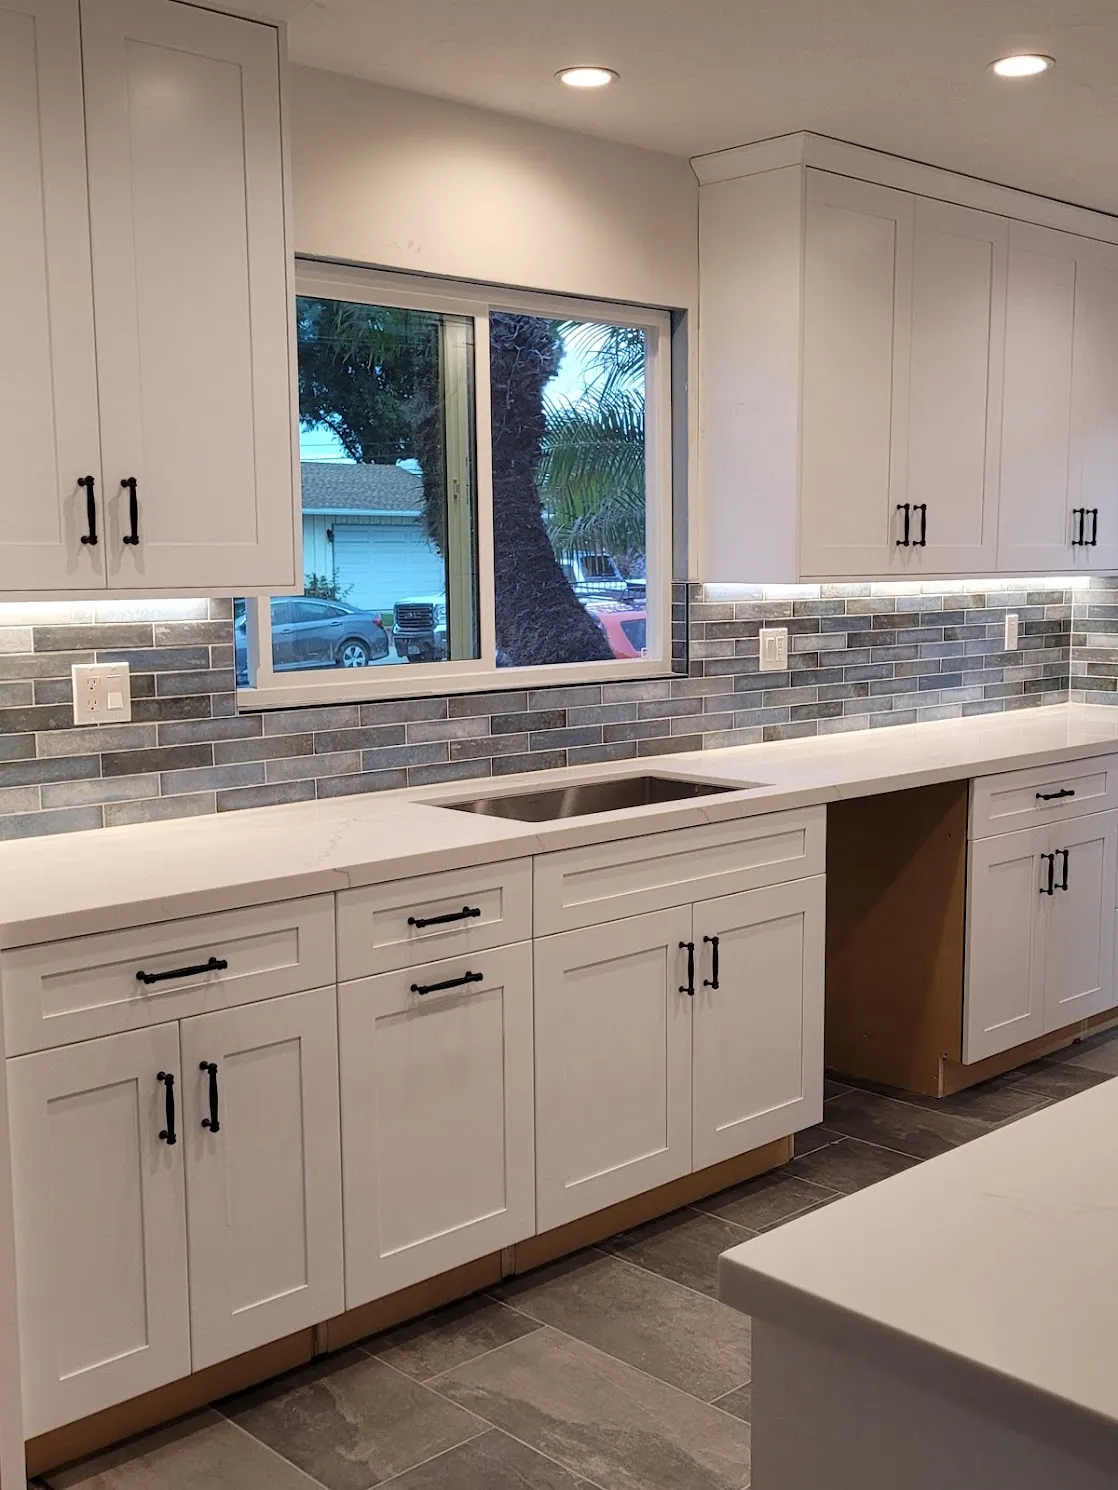 Once more, white kitchen cabinets show to be a flexible option that complements a variety of decor styles.